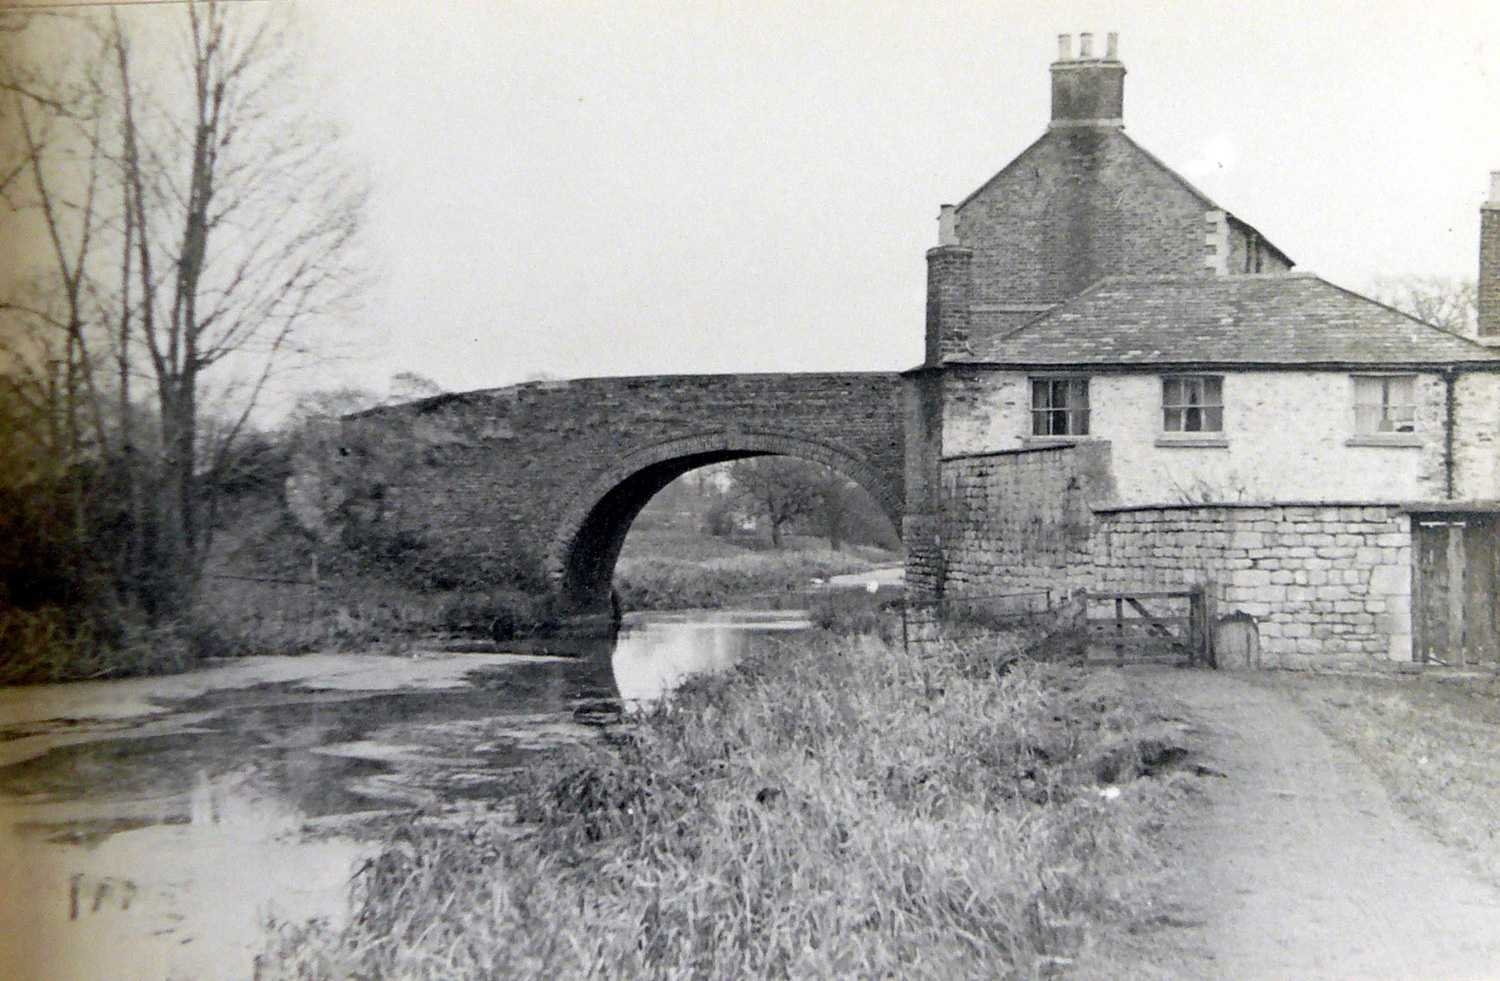 Nutshell Bridge and Cottage from the west (Glos Archives K185/1)